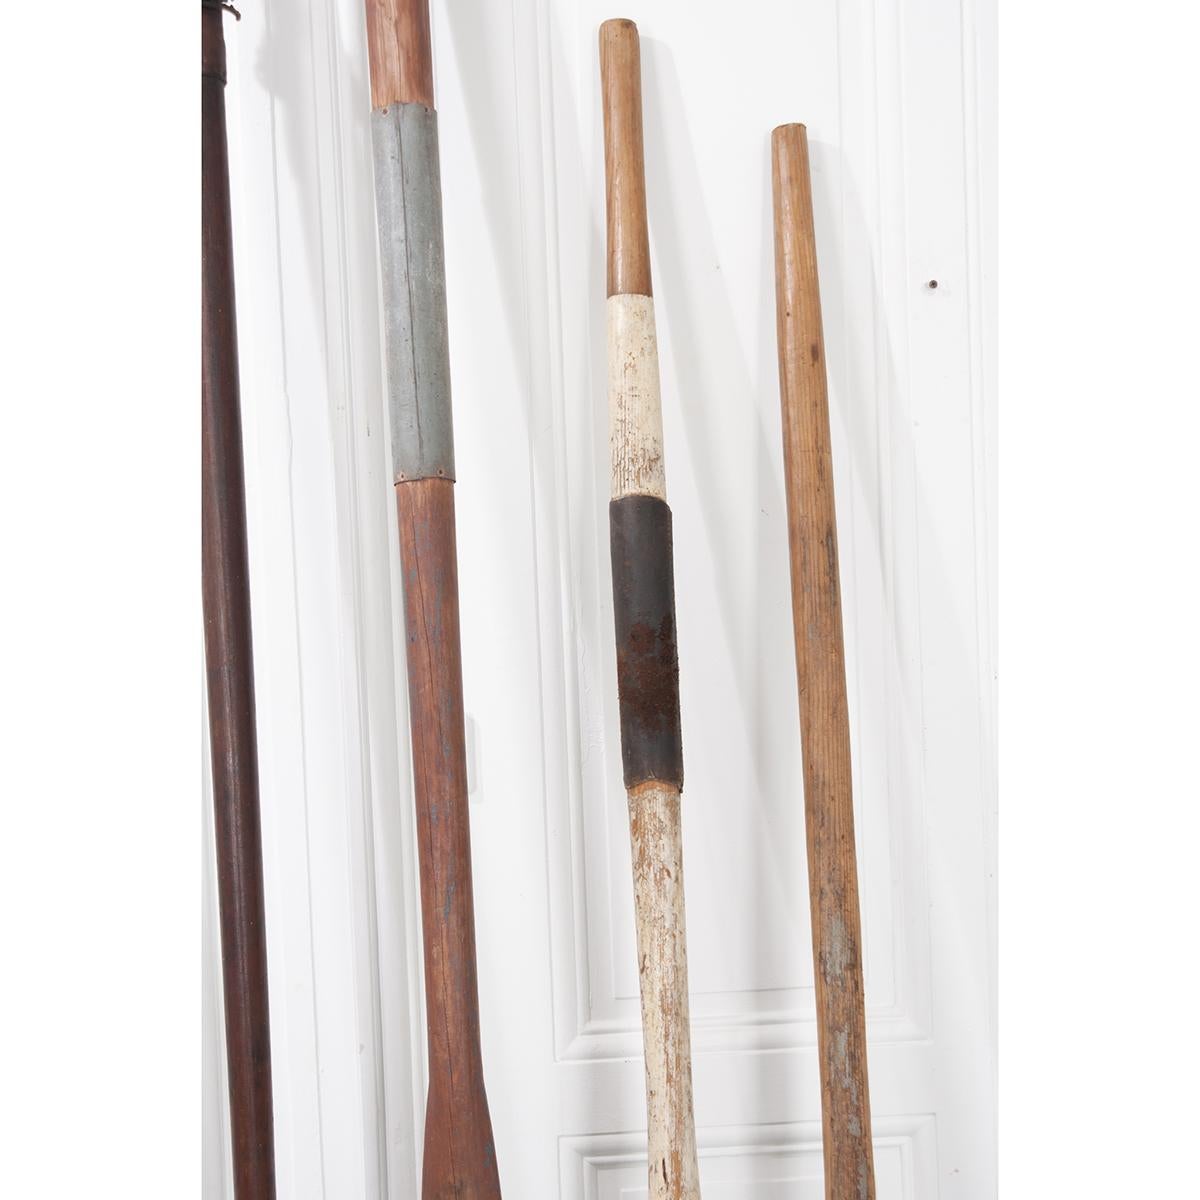 Collection of 10 Vintage Oars 3